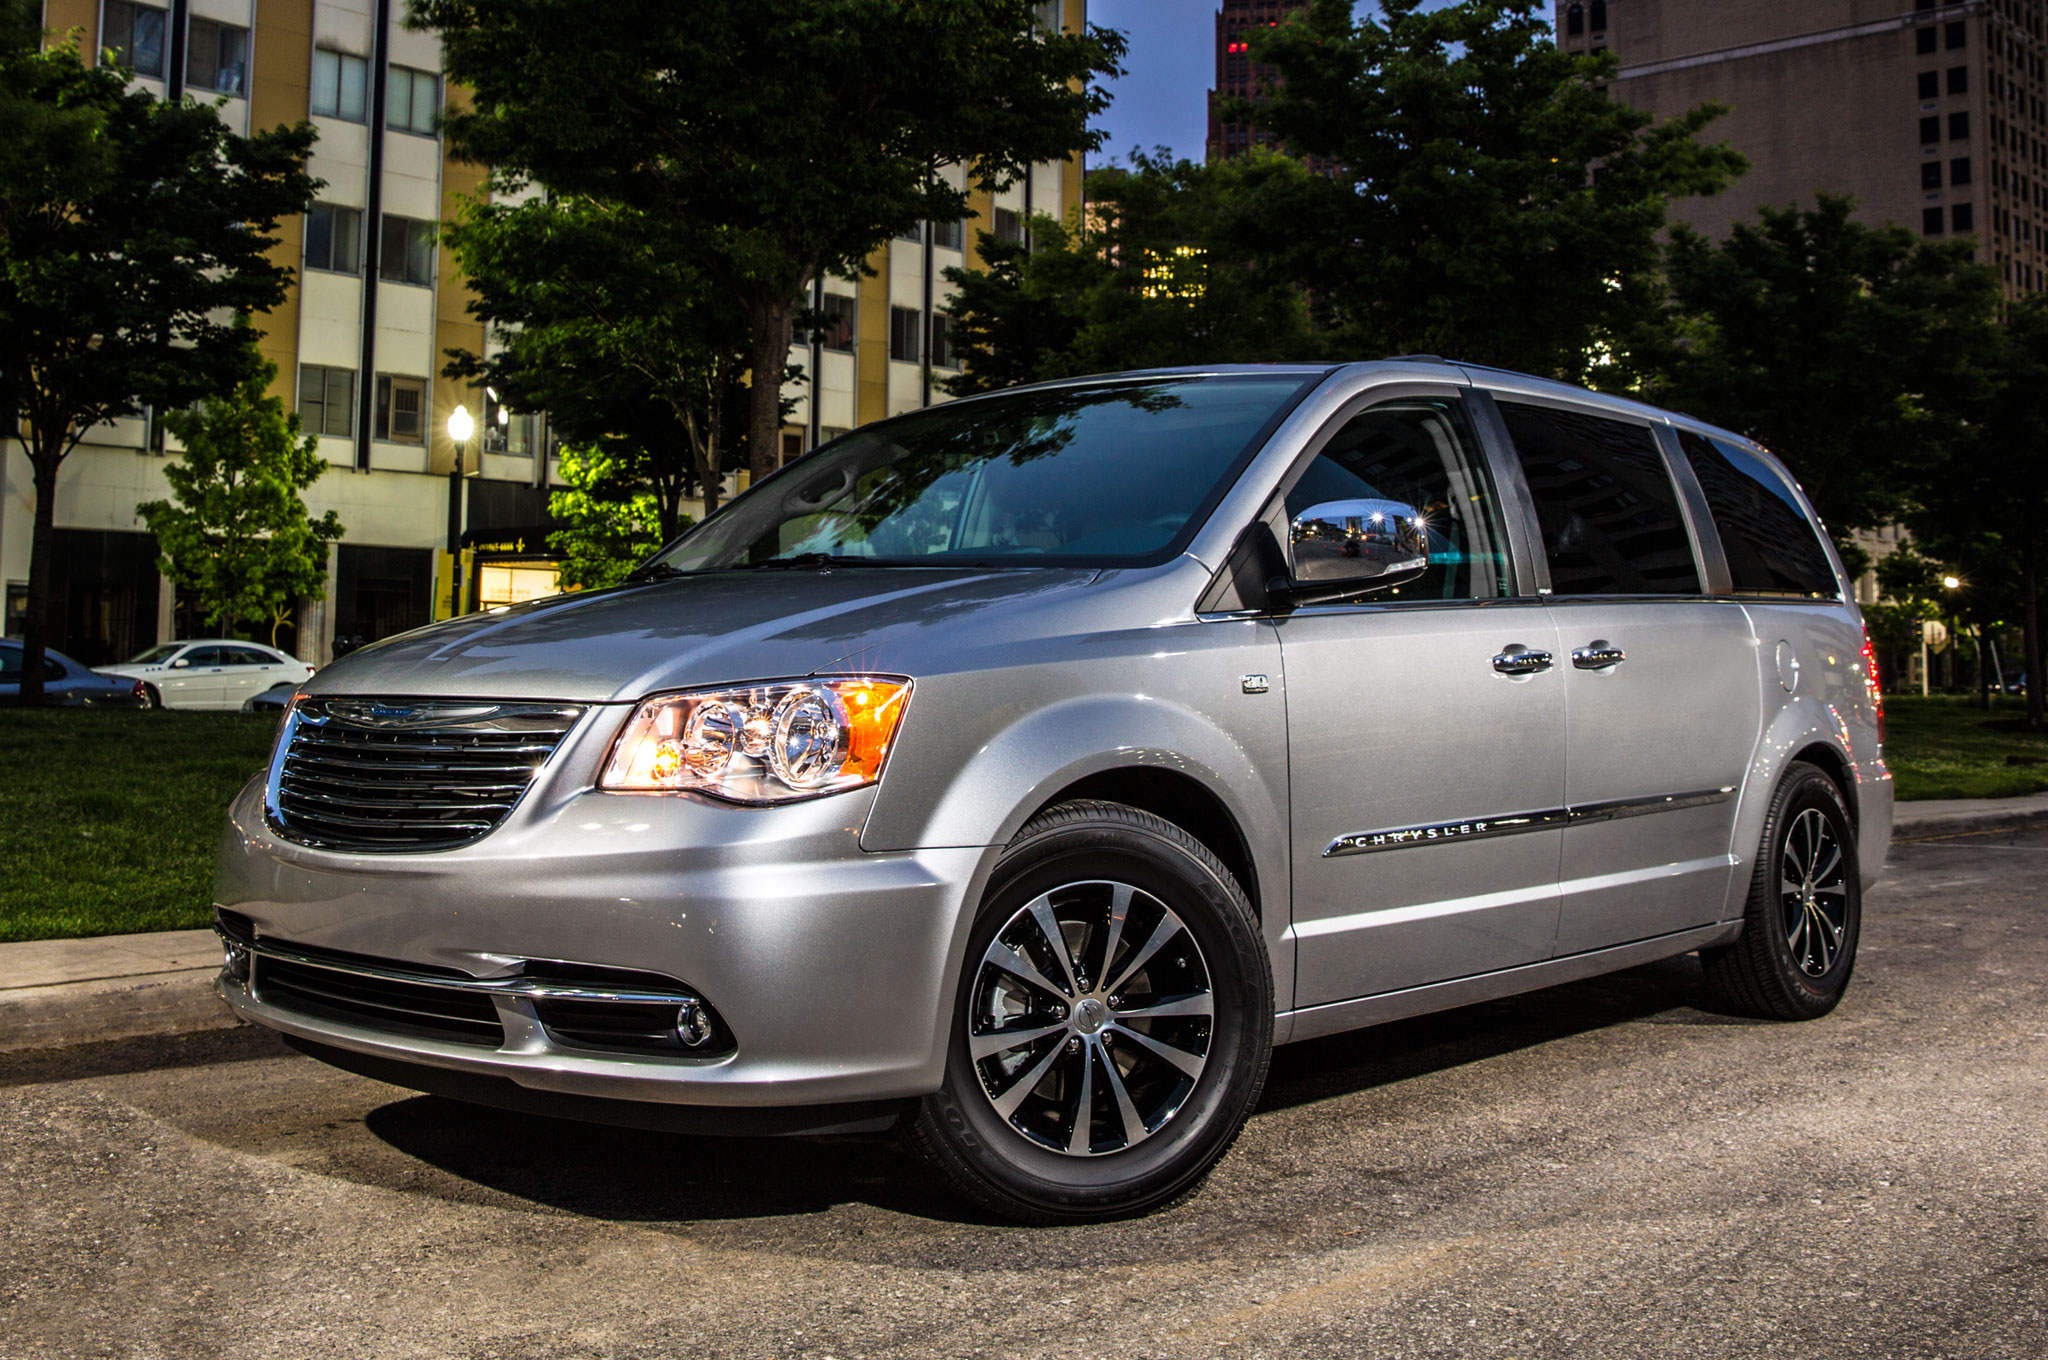 Chrysler town and country lease price